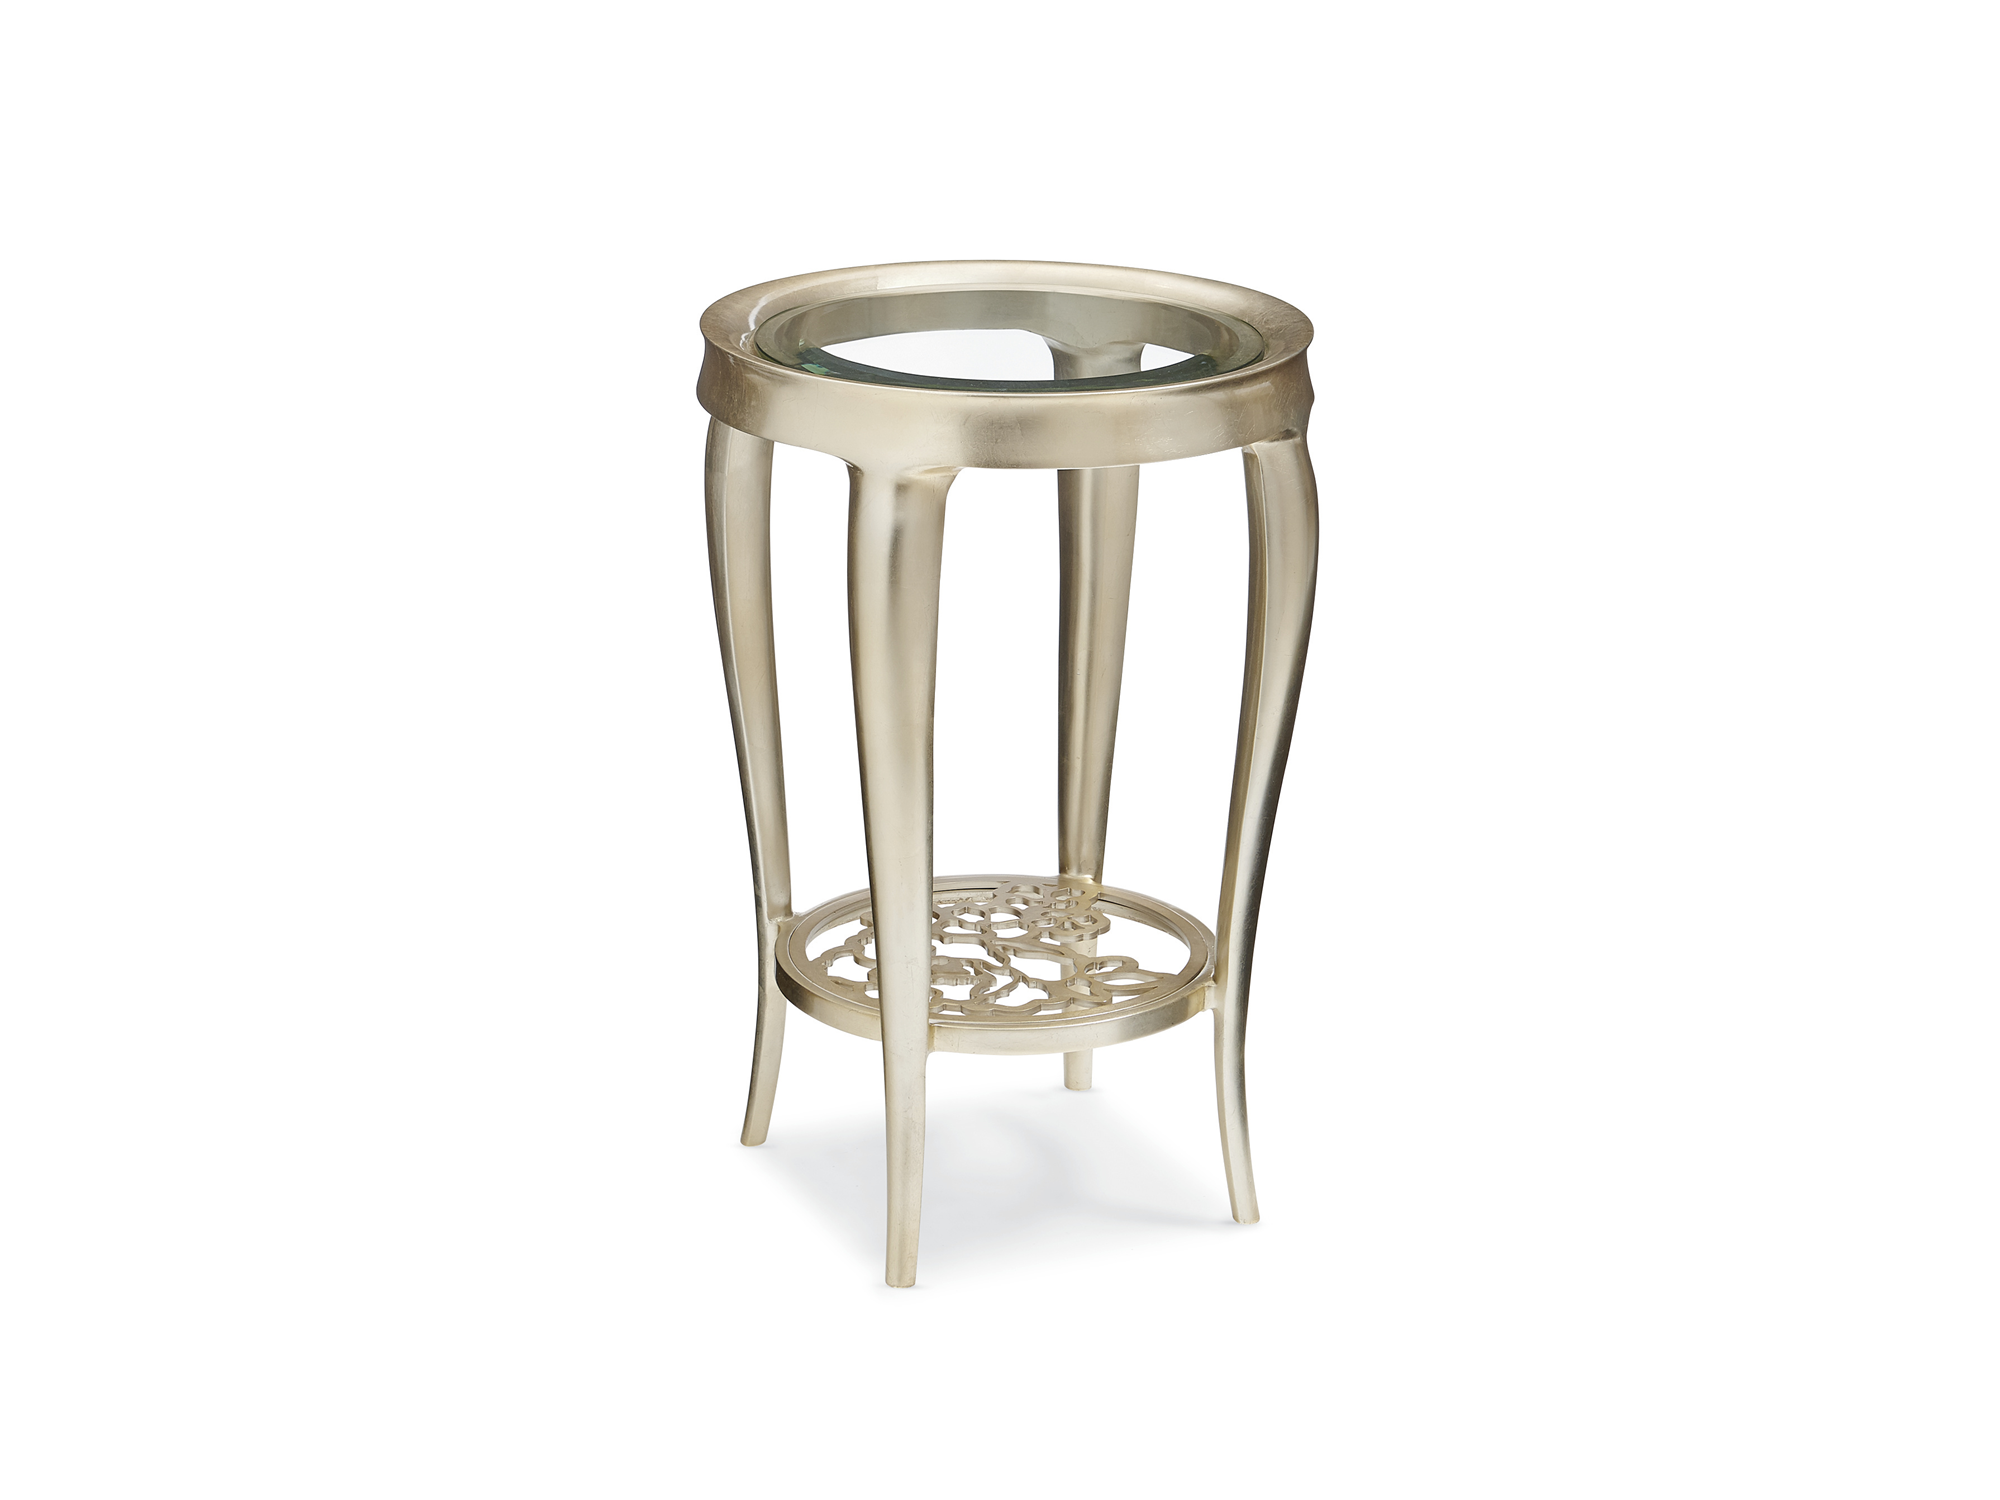 Babs Just for you Side Table in Silver Leaf - Euro Living Furniture